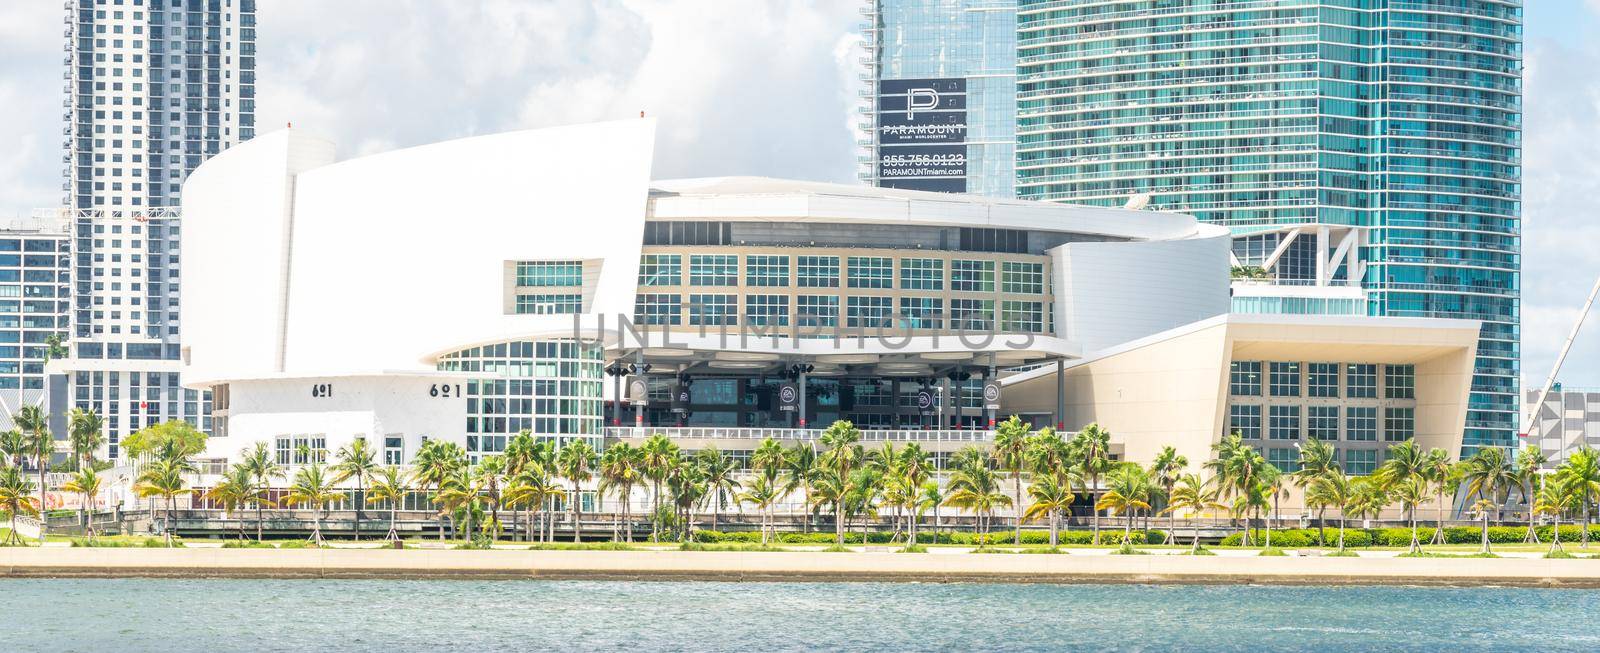 Miami, USA - September 11, 2019: American Airlines arena in downtown Miami, Florida USA